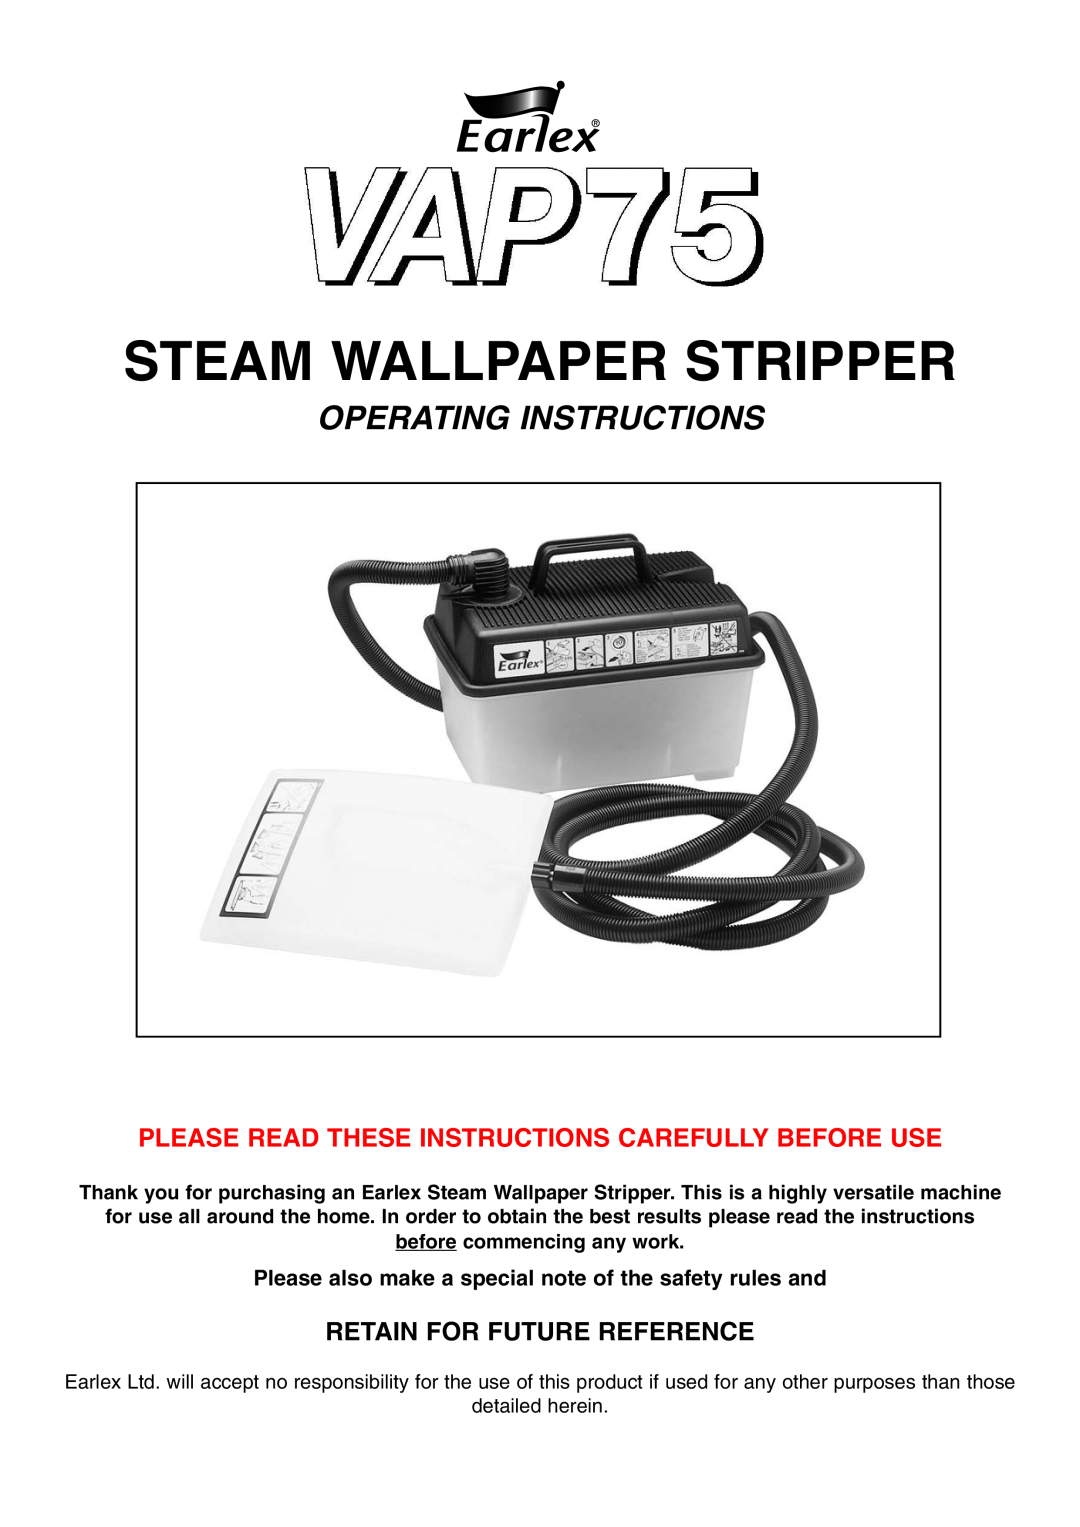 Earlex VAP75 manual Steam Wallpaper Stripper, Operating Instructions, Retain For Future Reference 